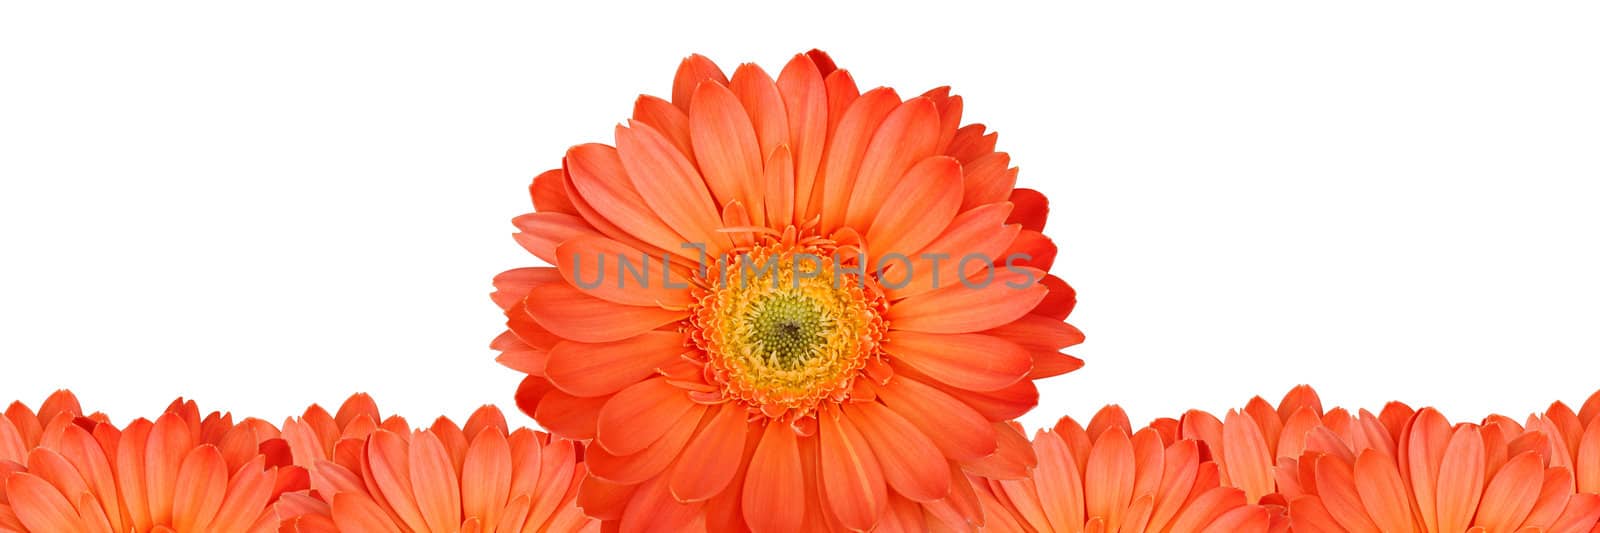 Gerbera flower create a frame on white background by foto76